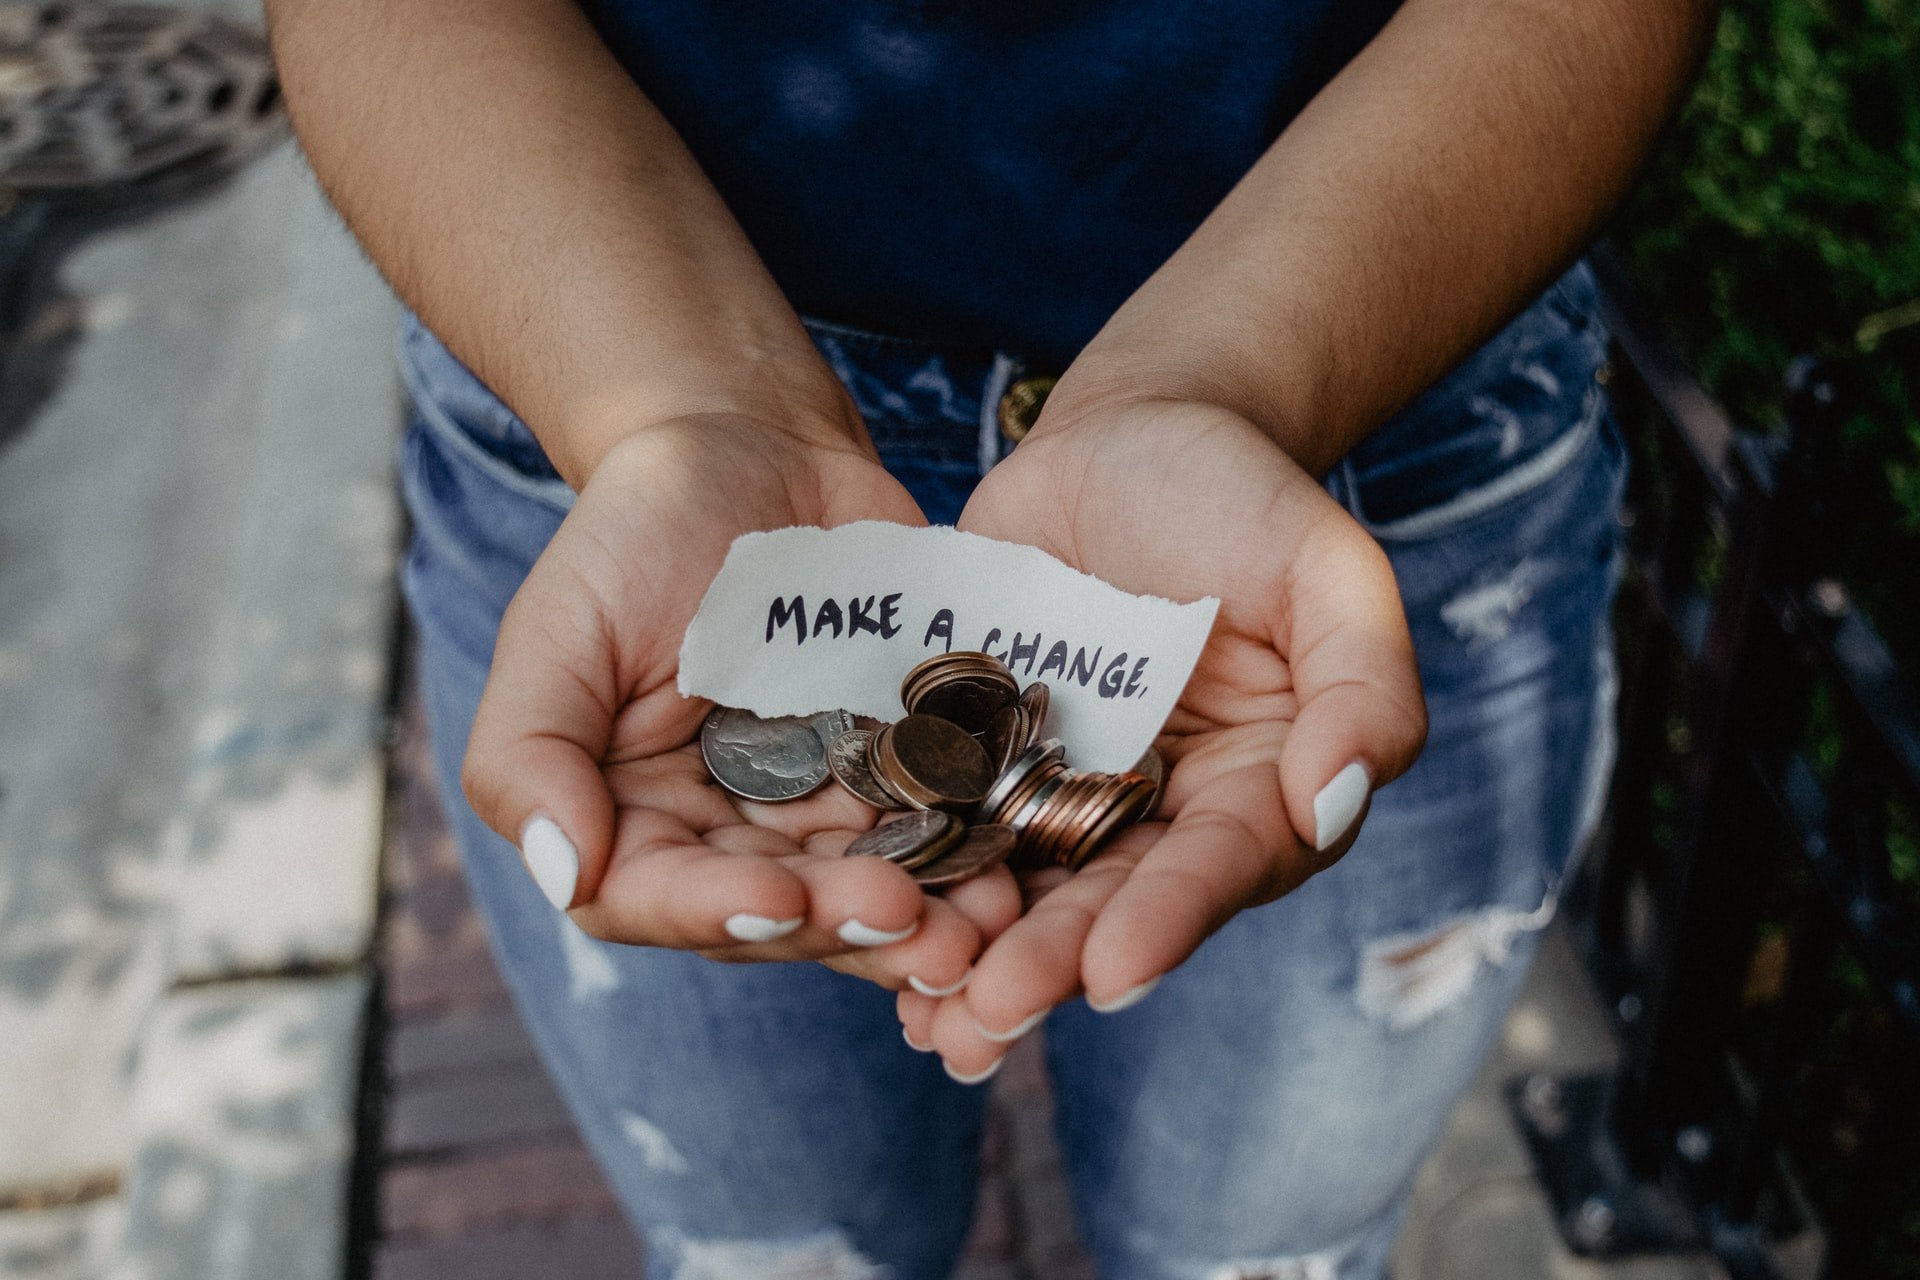 Many Redditors asked OP why he didn't donate money instead | Source: Unsplash